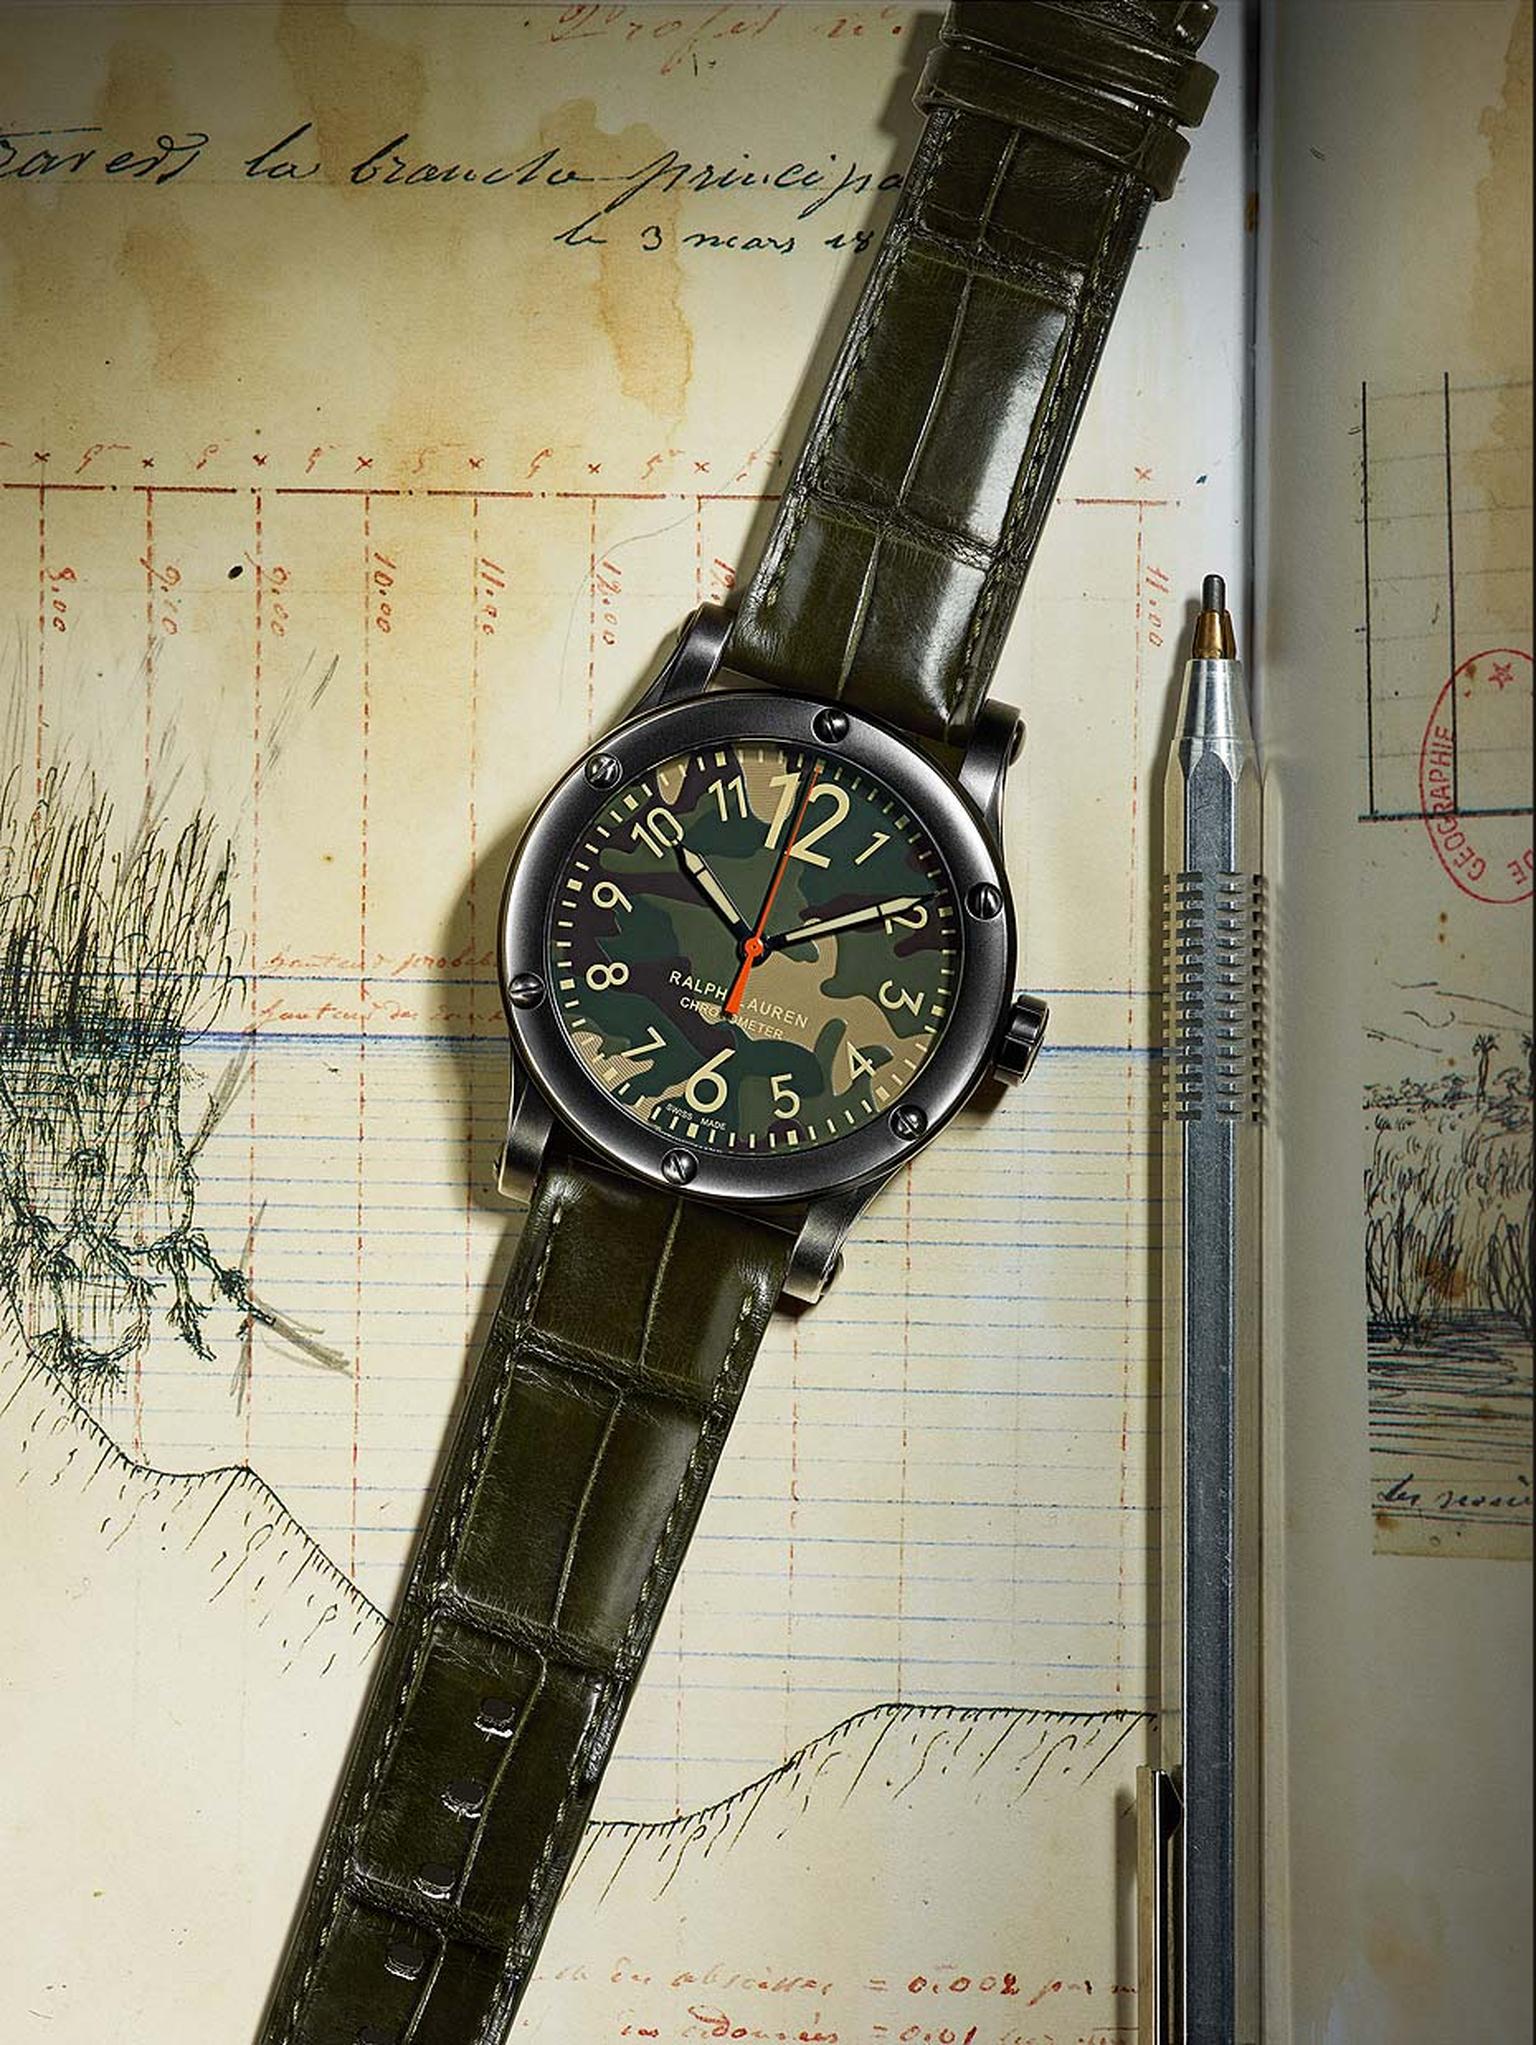 Ralph Lauren watches RL67 Safari Chronometer. Like its brother with the khaki dial, the new camouflage dial watch is equipped with automatic calibre RL300-1, a COSC-certified chronometer movement.